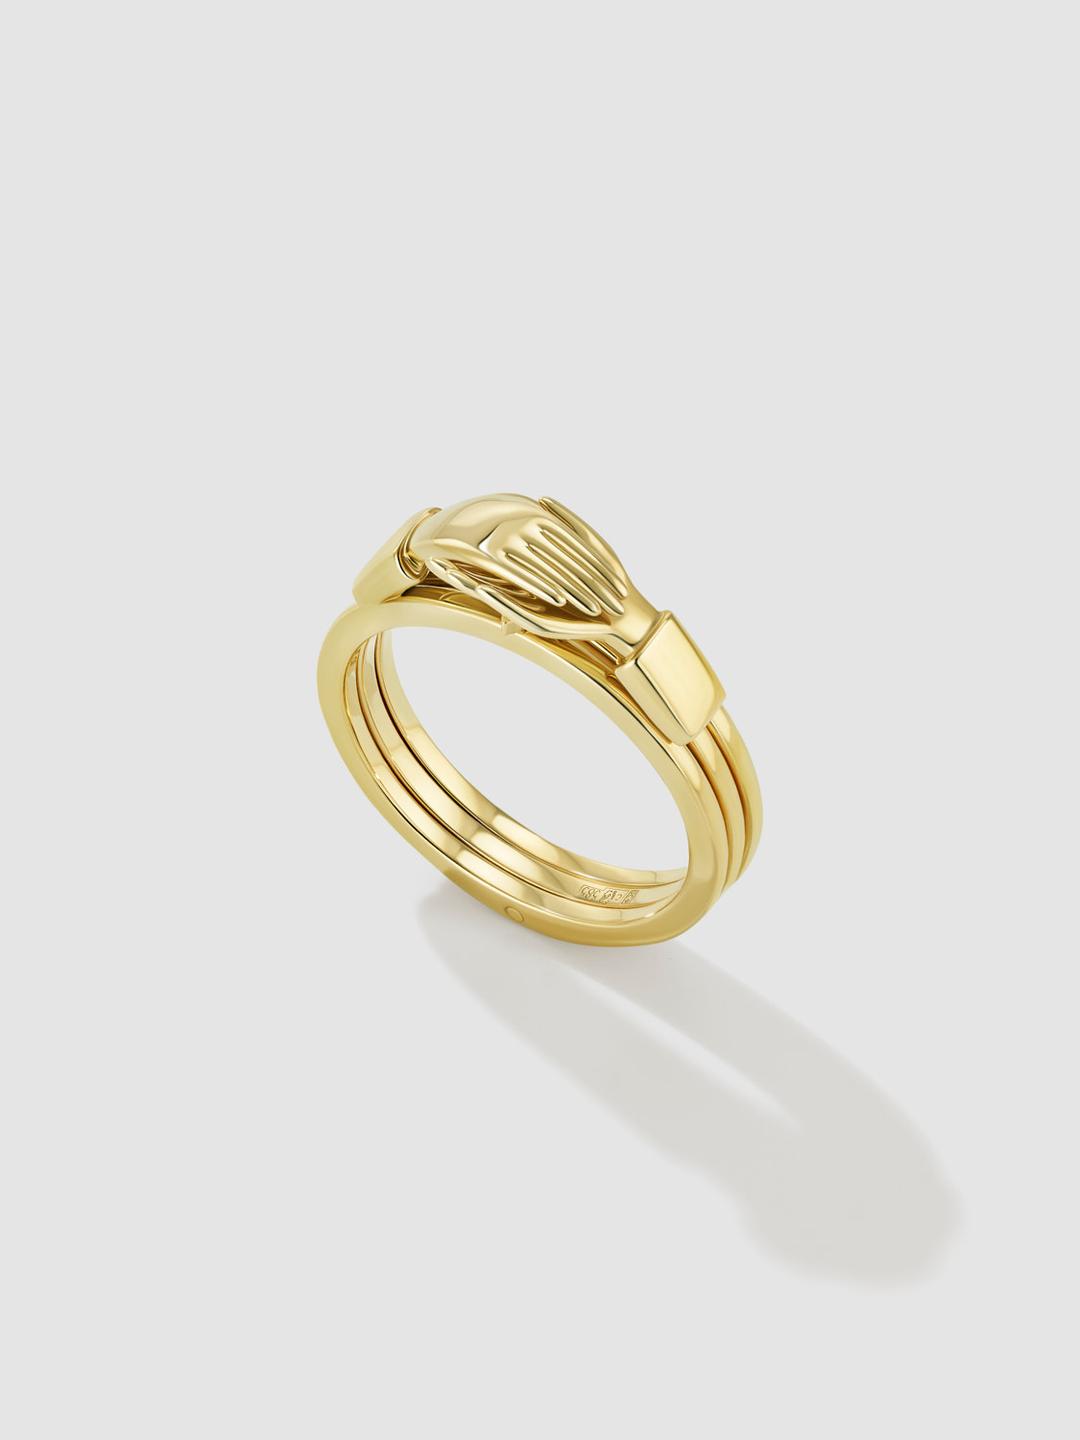 Avgvst Jewelry | Browse Silver and Gold Rings | Shop Online